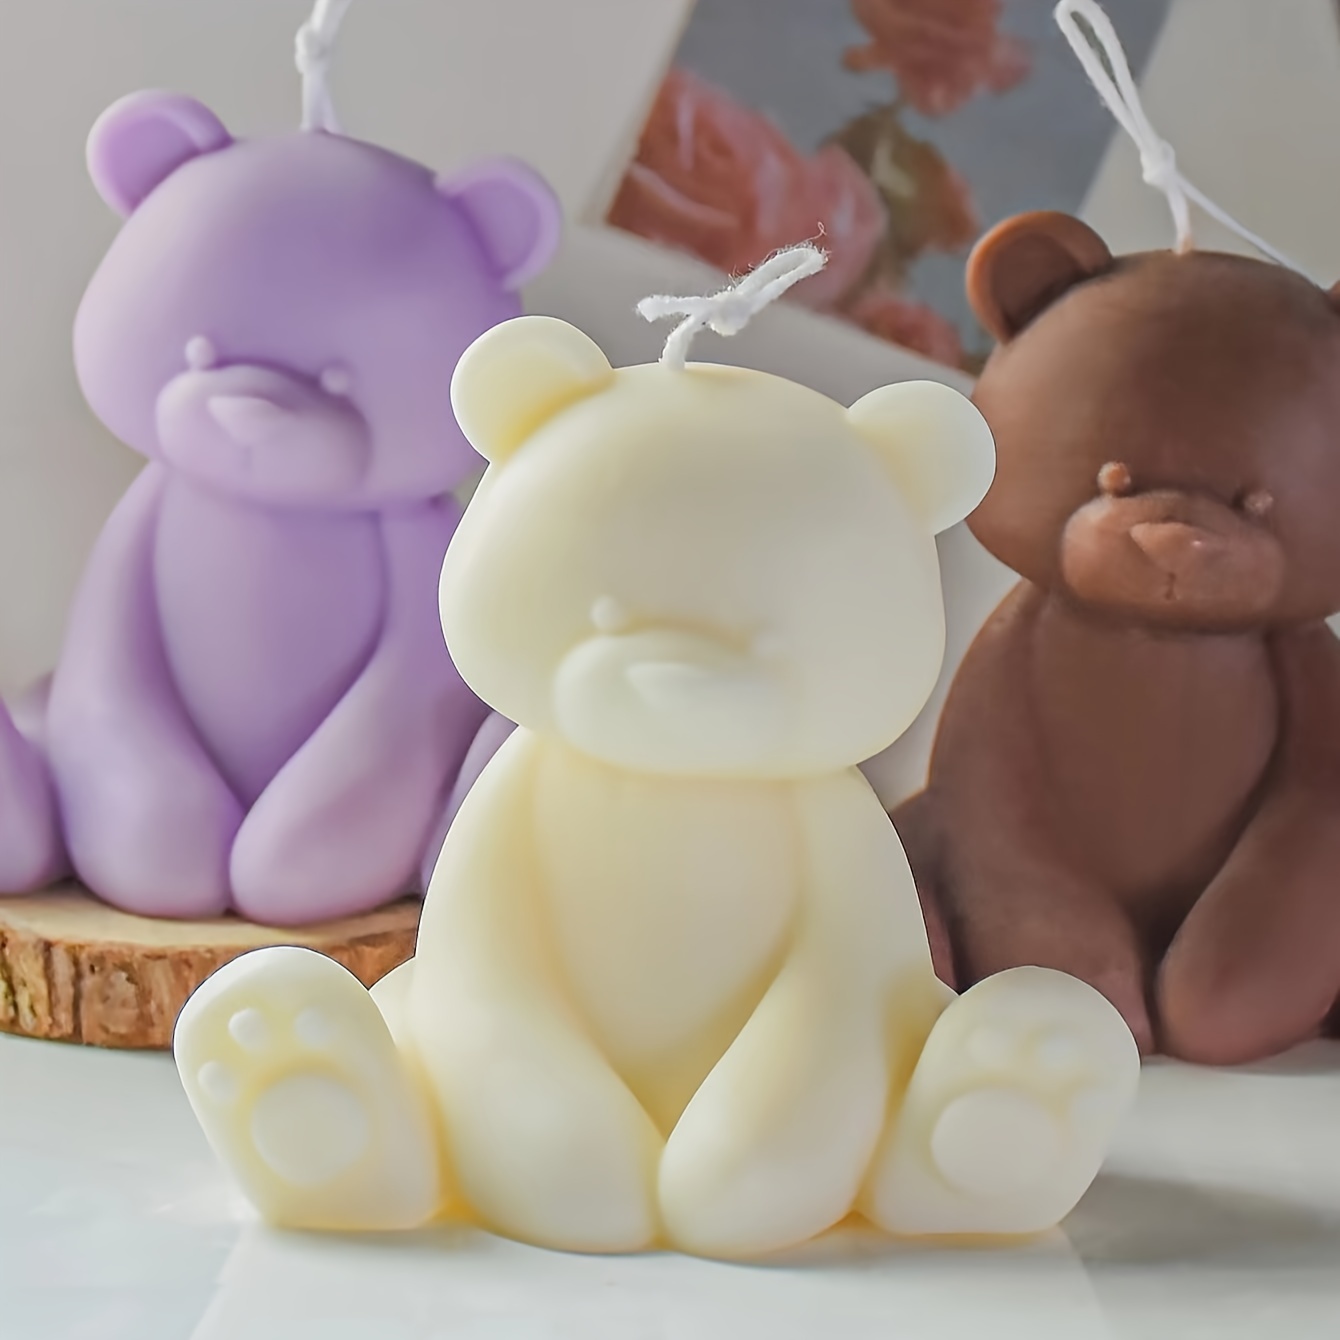 3D Teddy Bear Mold Silicone Gypsum Ornament Candle Making